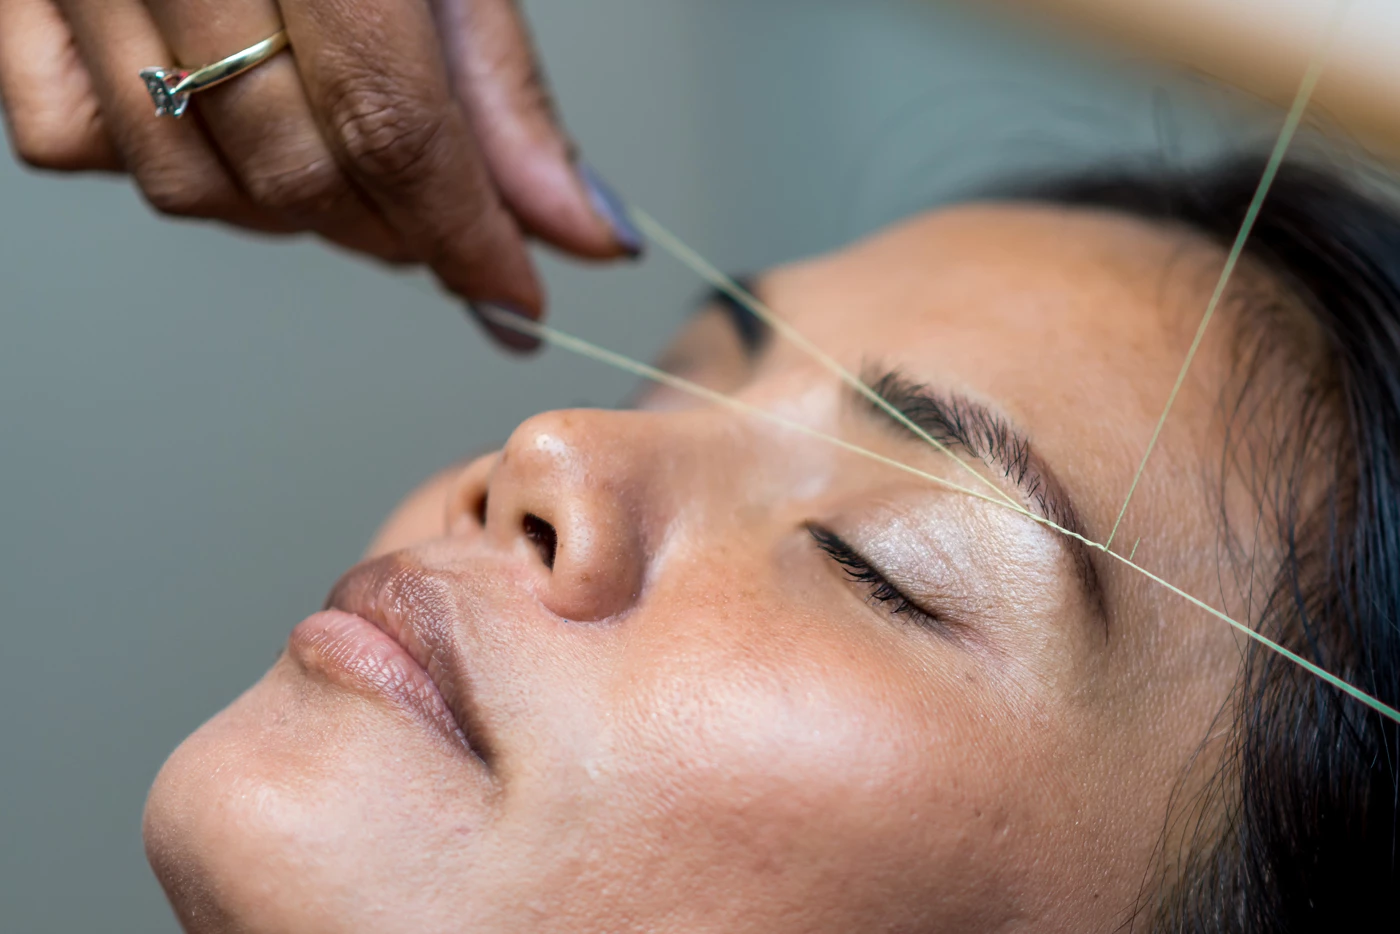 A woman having her eyebrows threaded at a salon